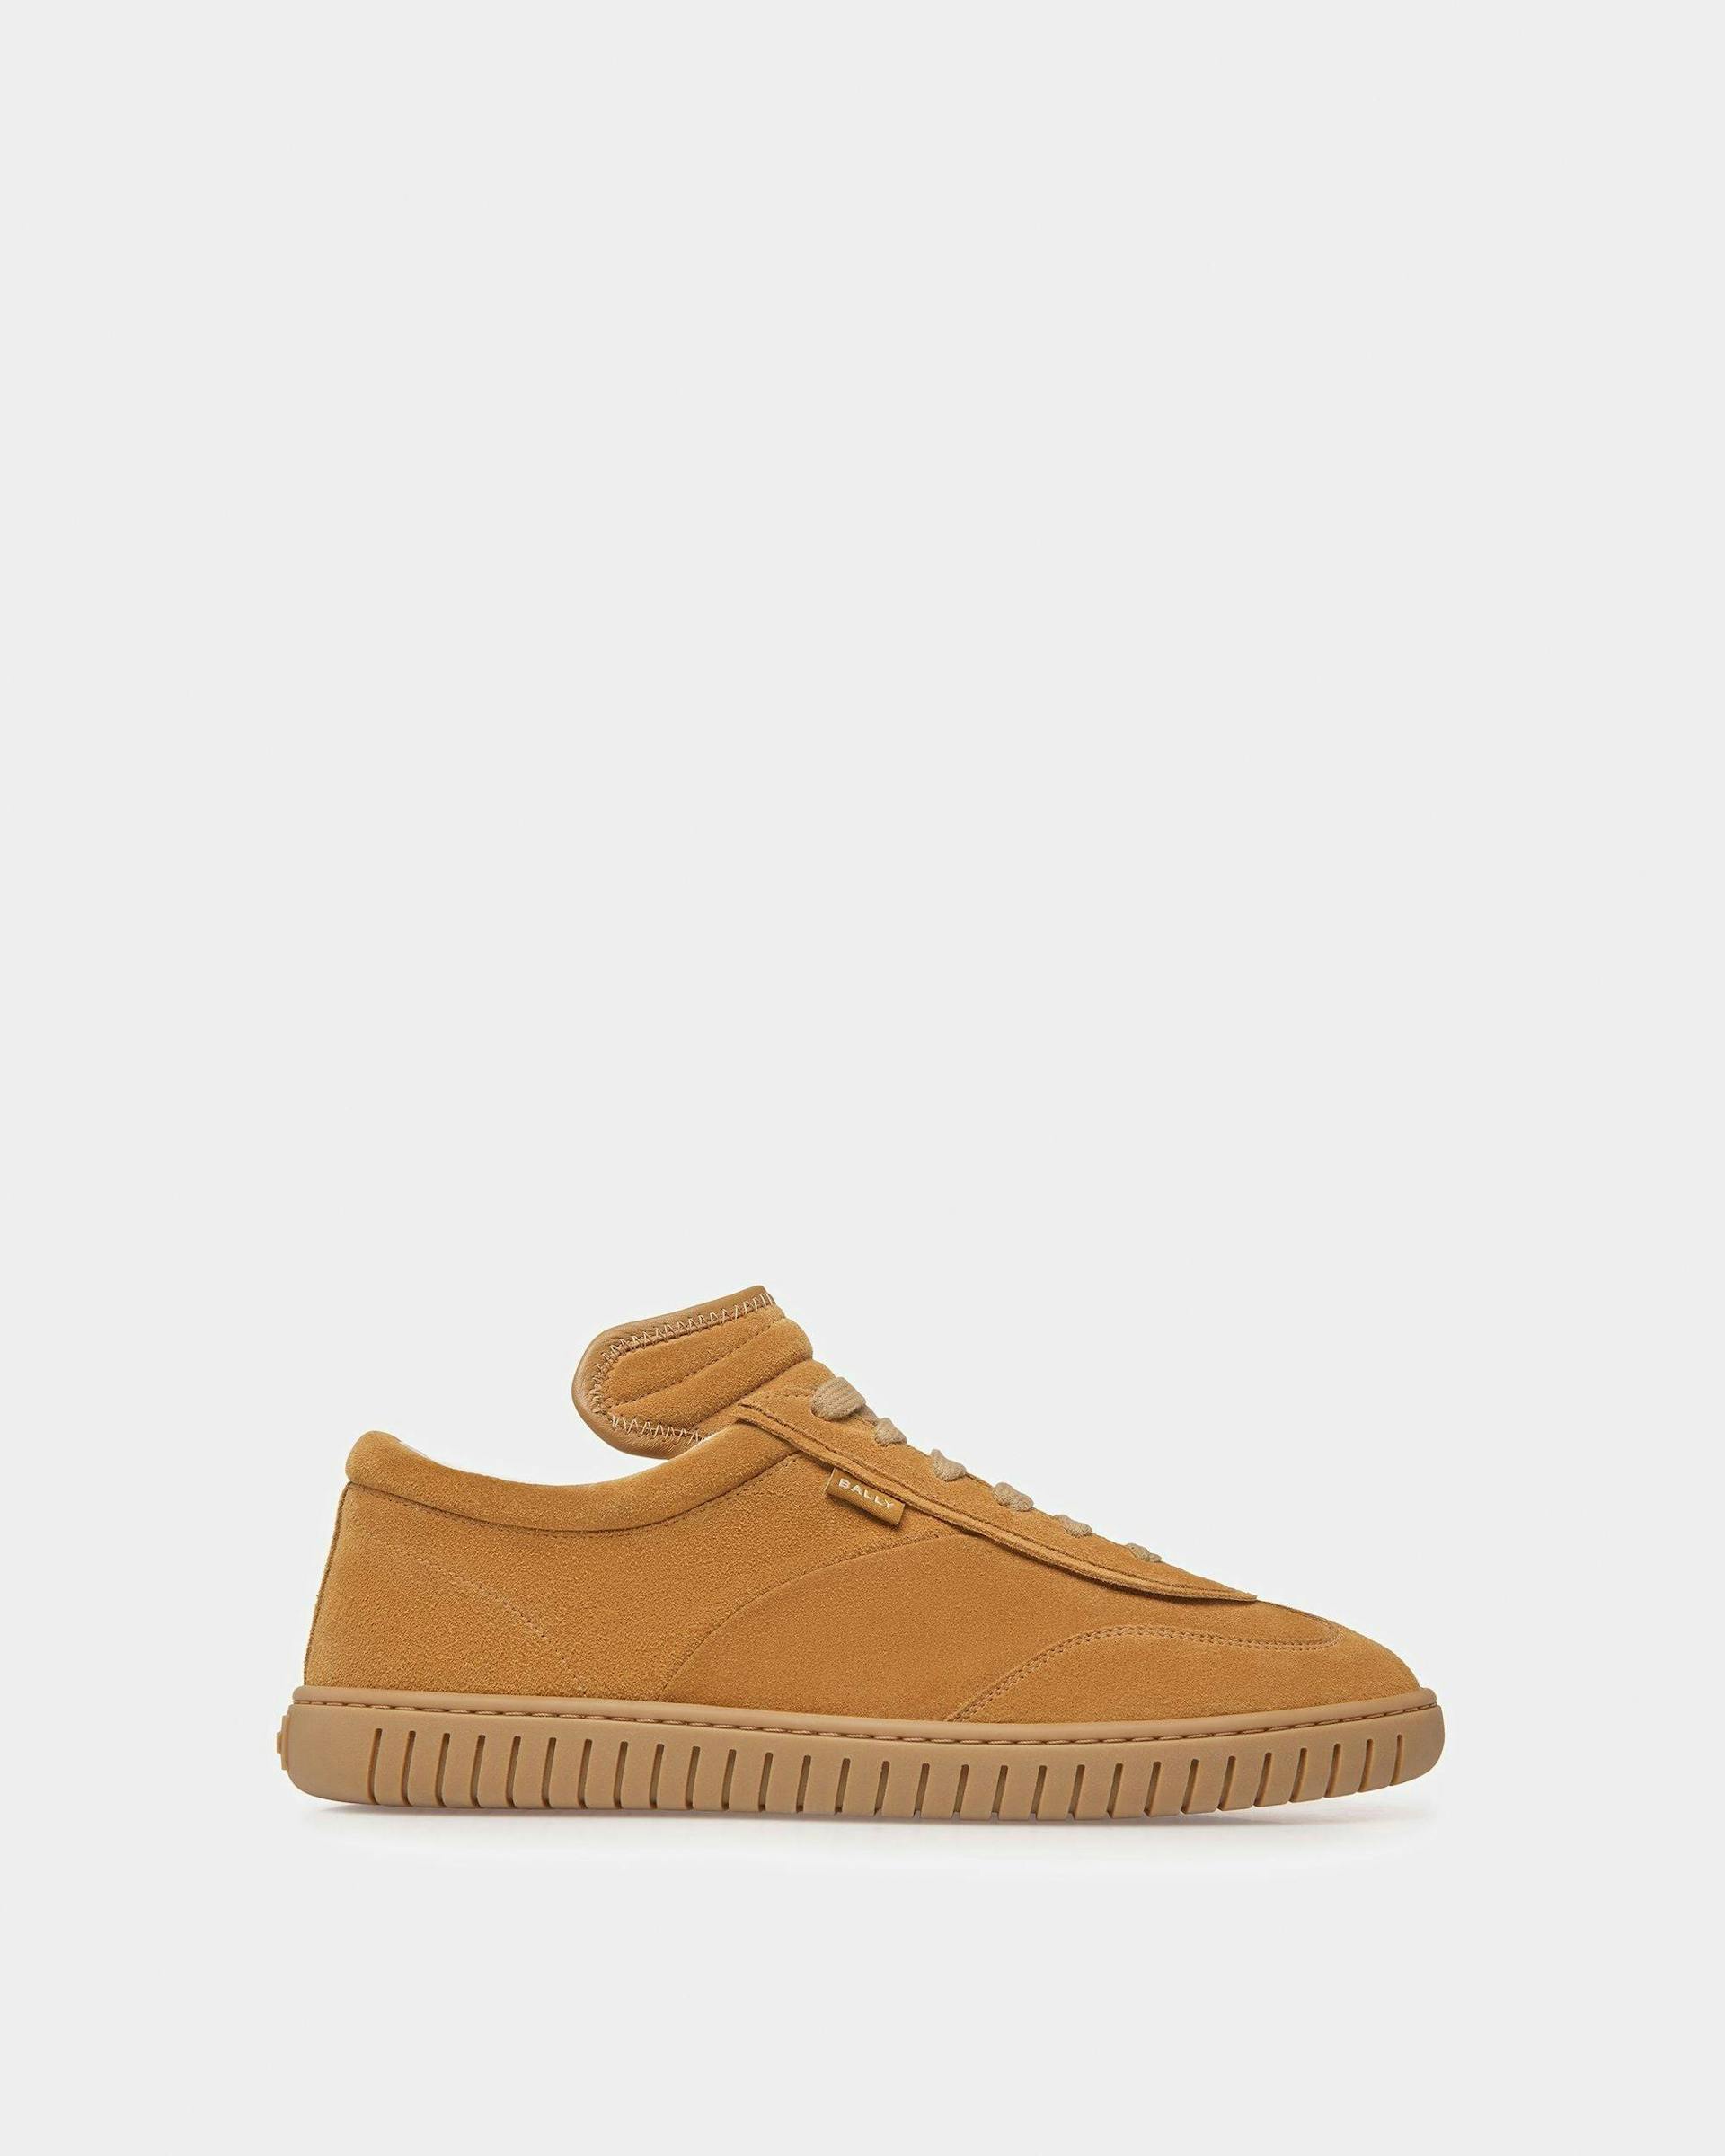 Player Sneakers In Desert And Amber Leather - Men's - Bally - 01